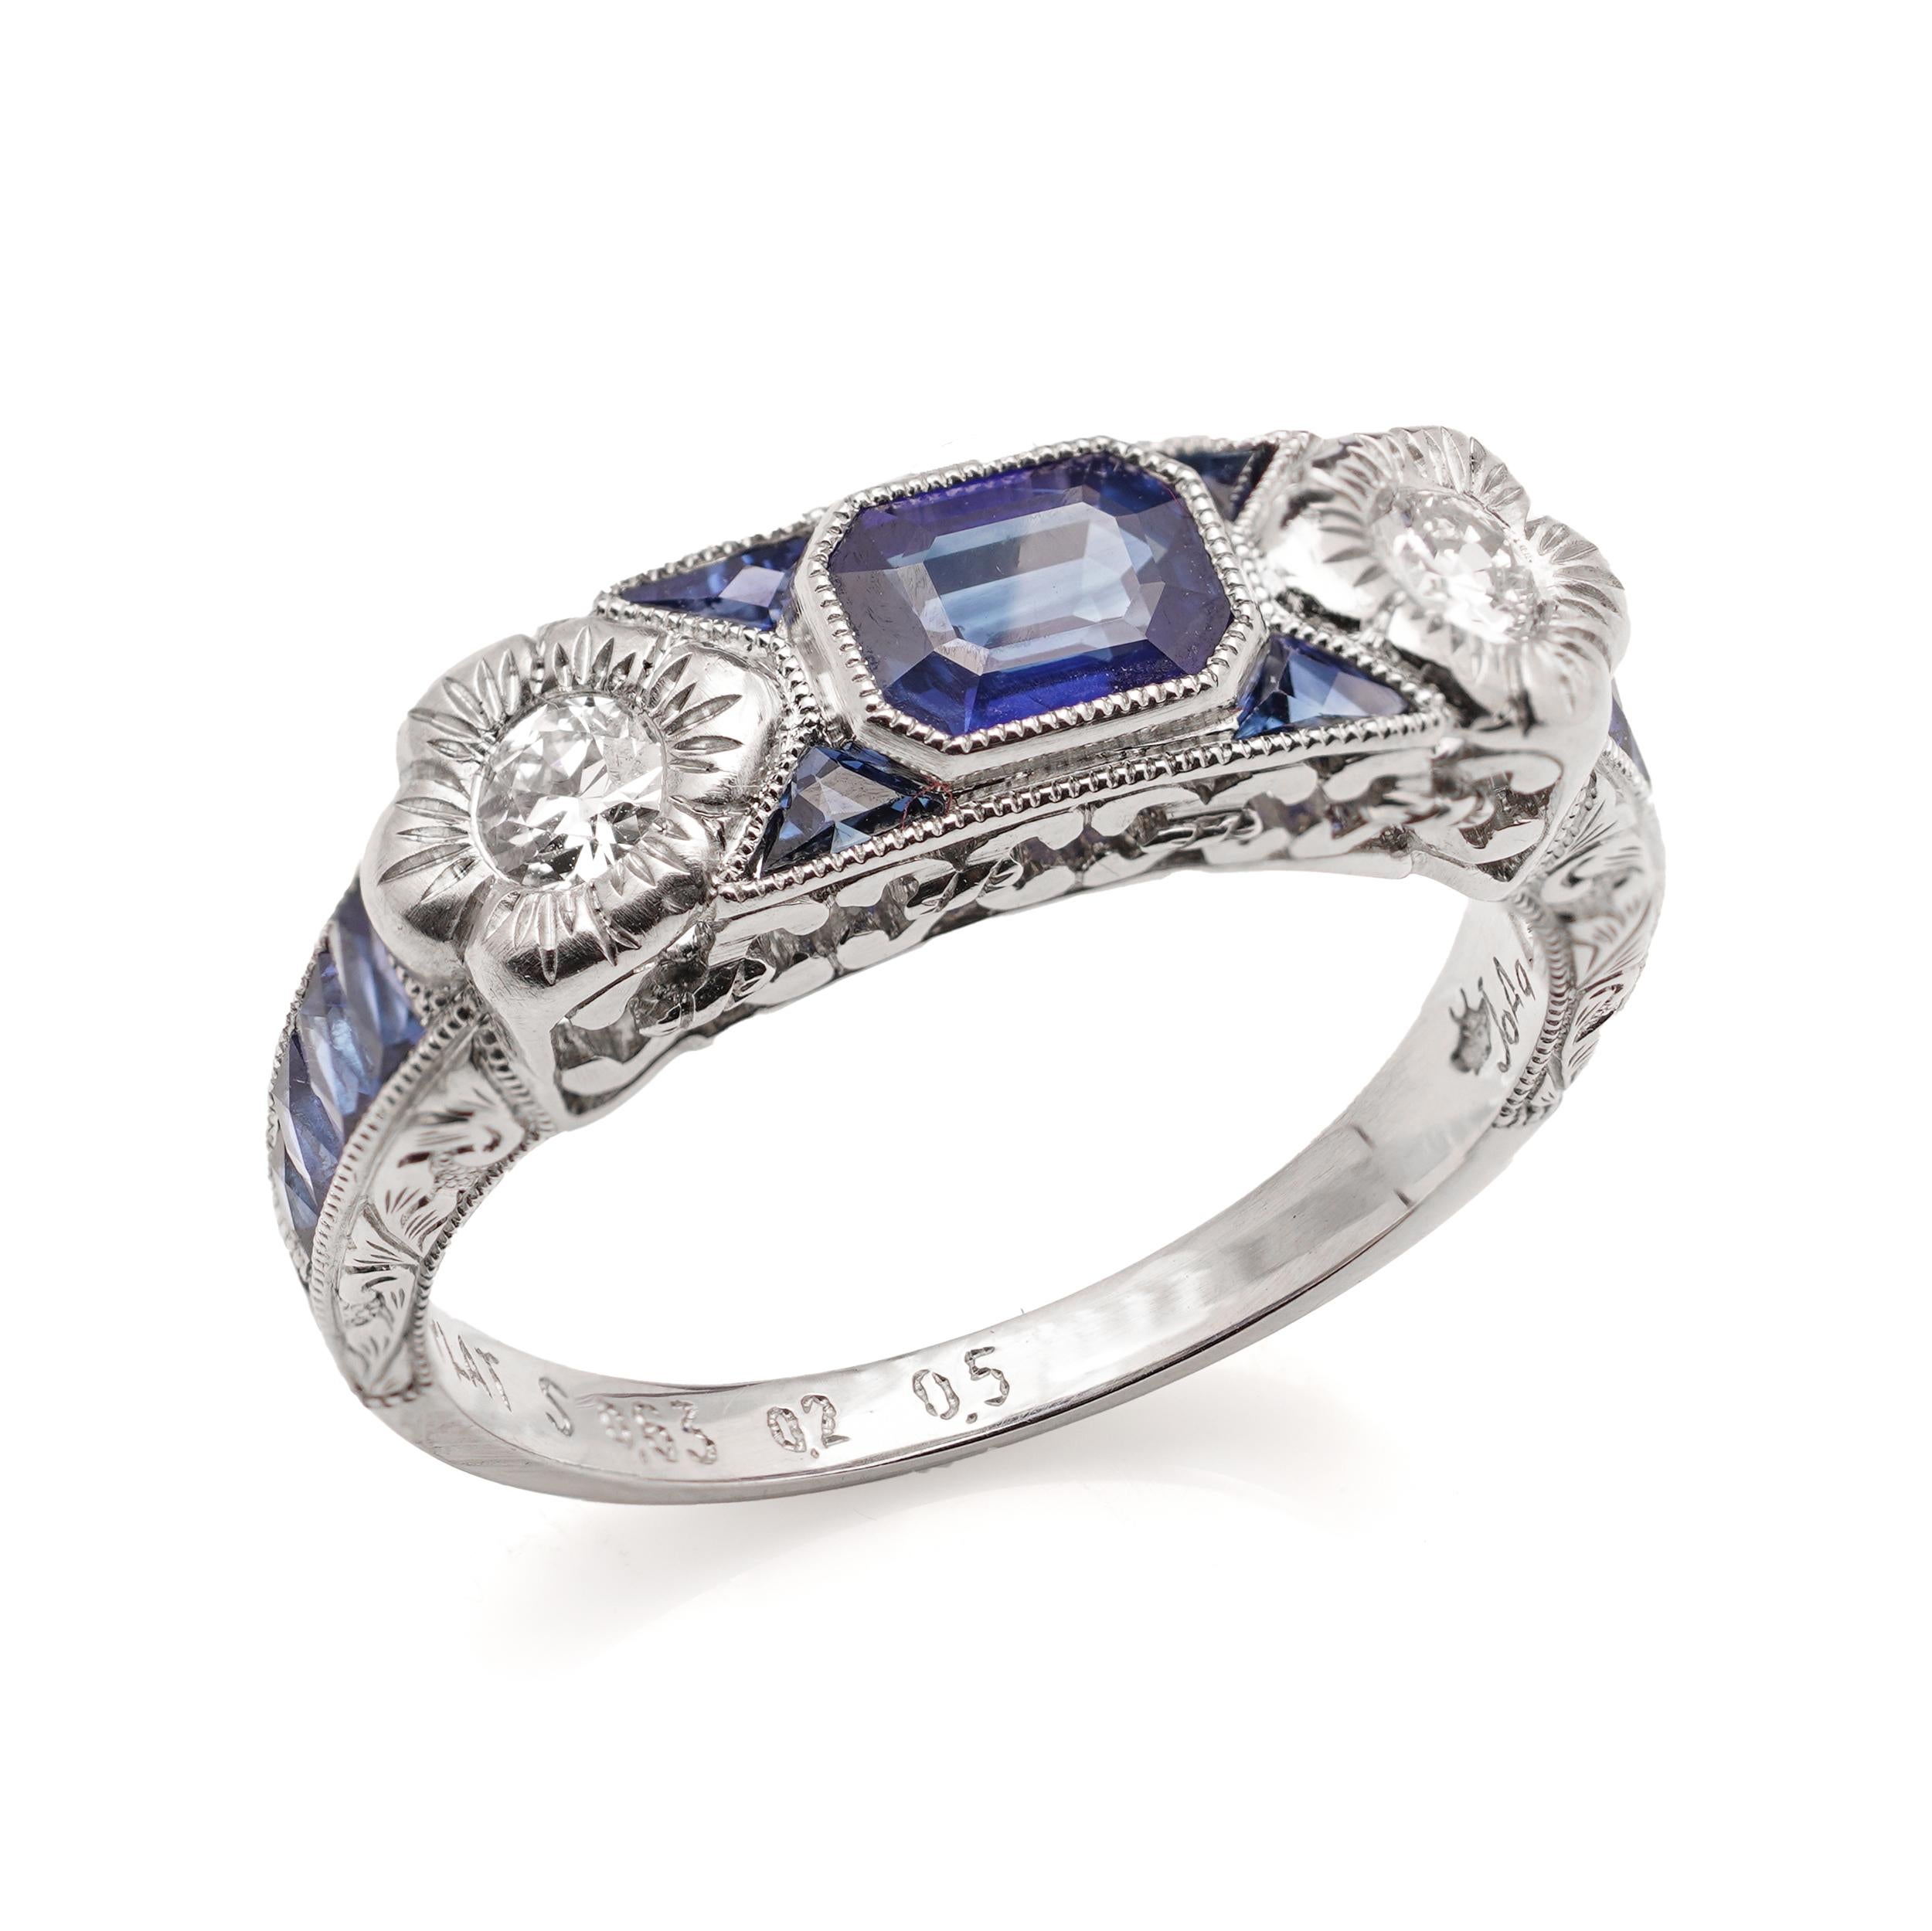 Platinum 0.63 carats of Emerald - cut Blue Sapphire ring, set with two round brilliant diamonds, baguette, and triangle-cut sapphires. 

Made in After 2000
Maker: JoAq 
X-Ray tested positive for .850 platinum purity. 

Dimensions - 
Finger Size (UK)